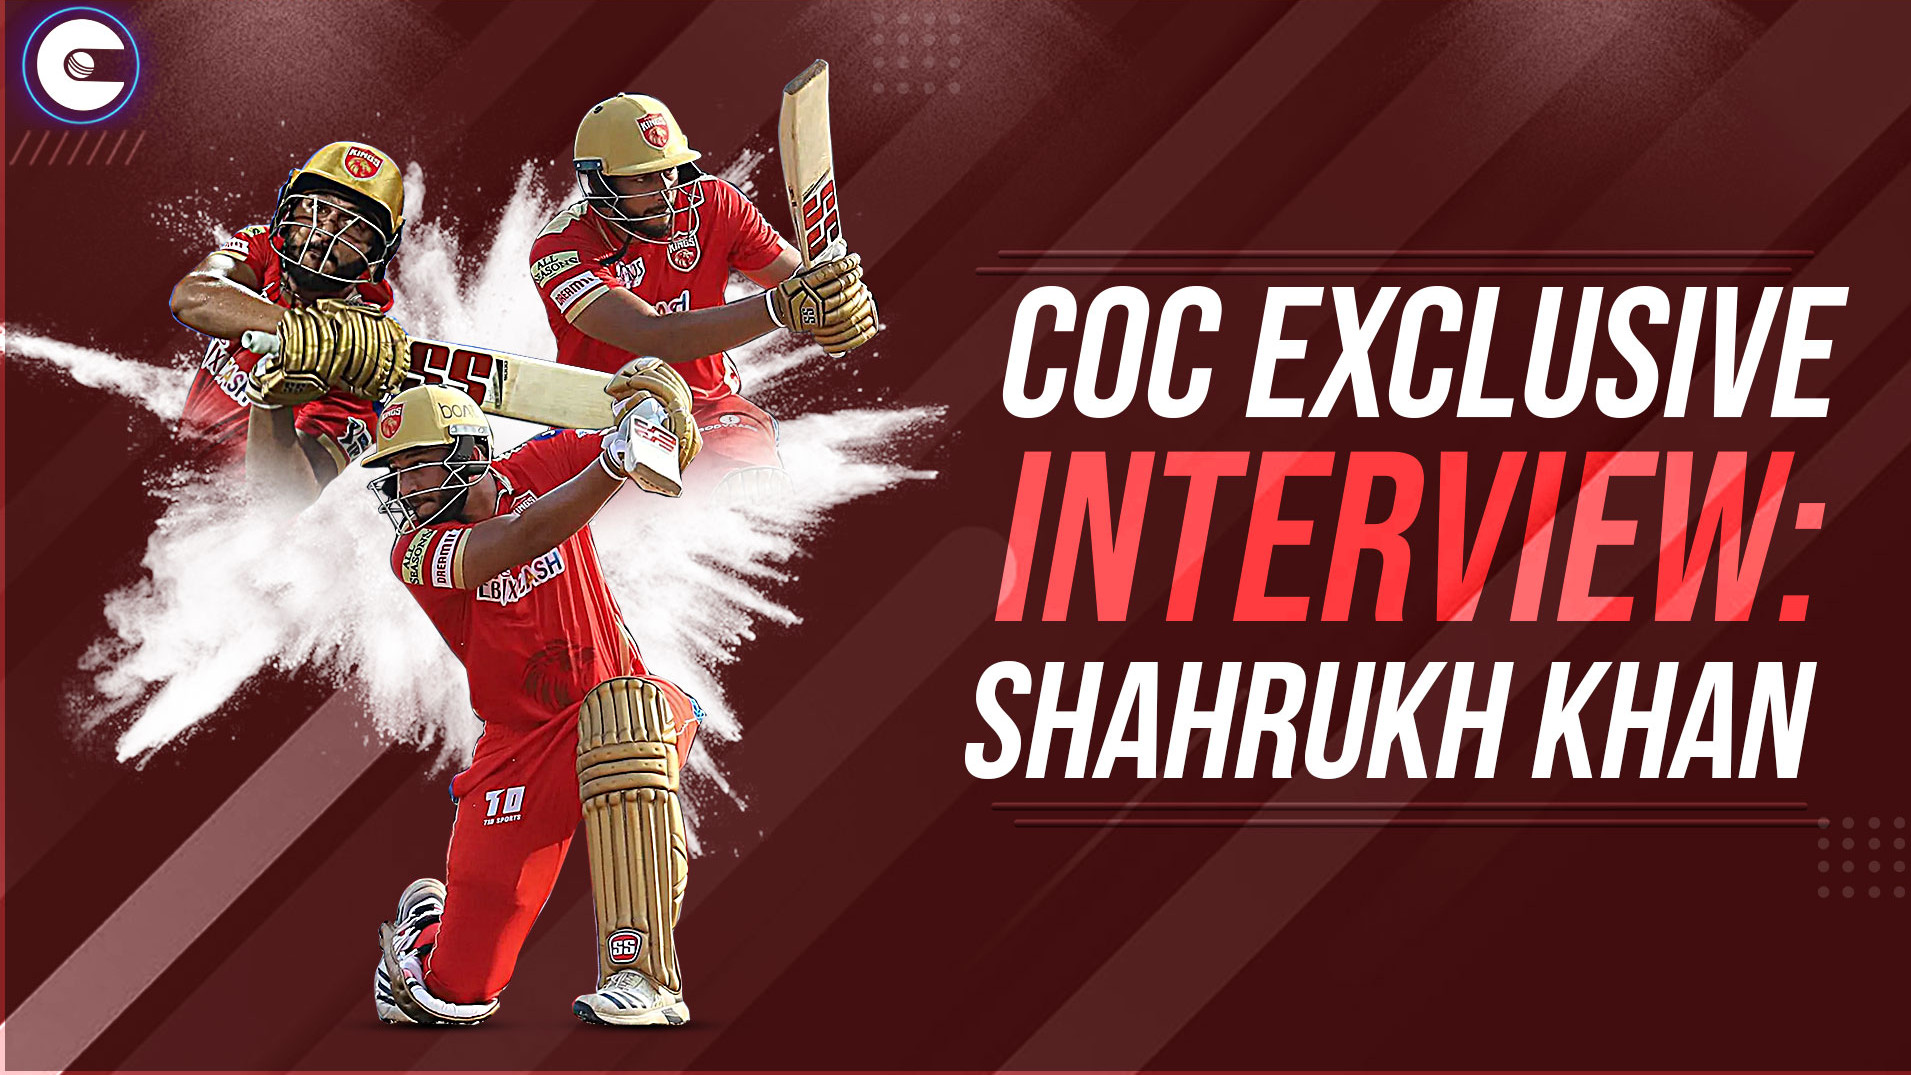 COC Exclusive: Shahrukh Khan's interview with Ishan Mahal